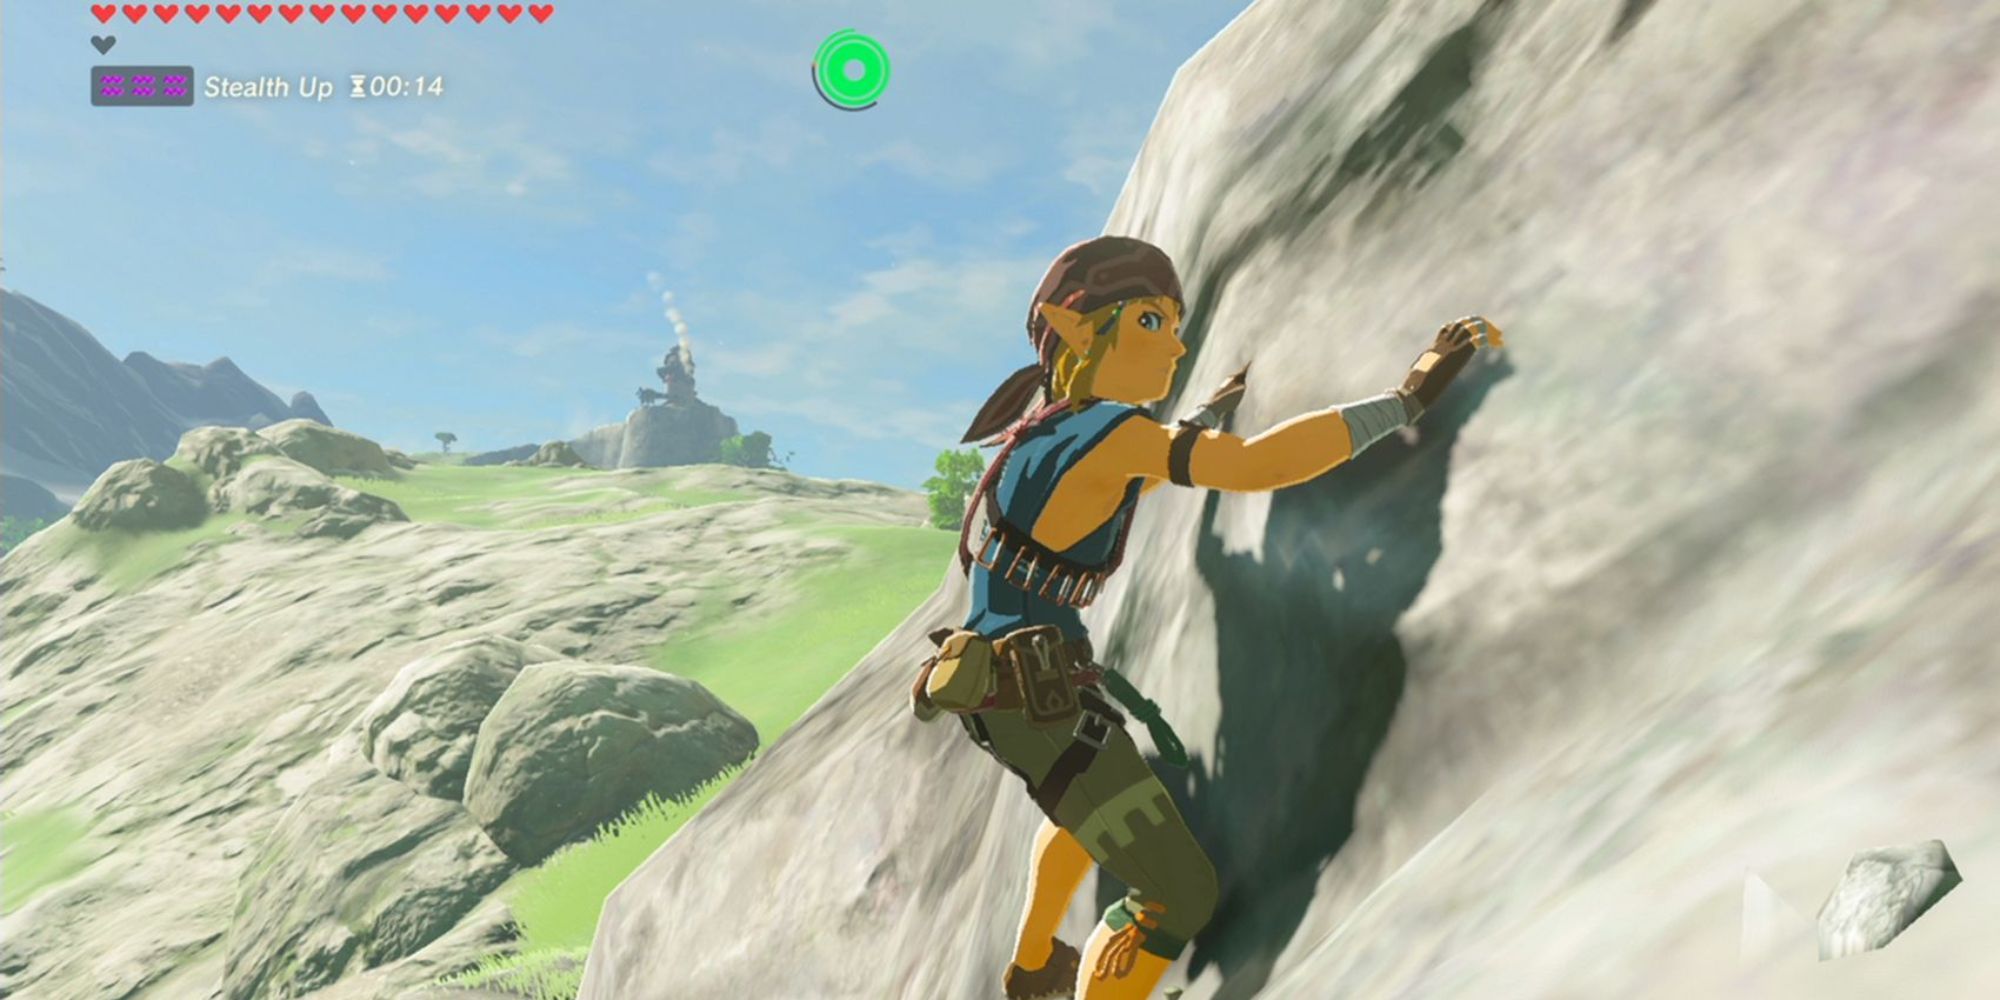 Link scales a mountain while wearing the Climbing Set